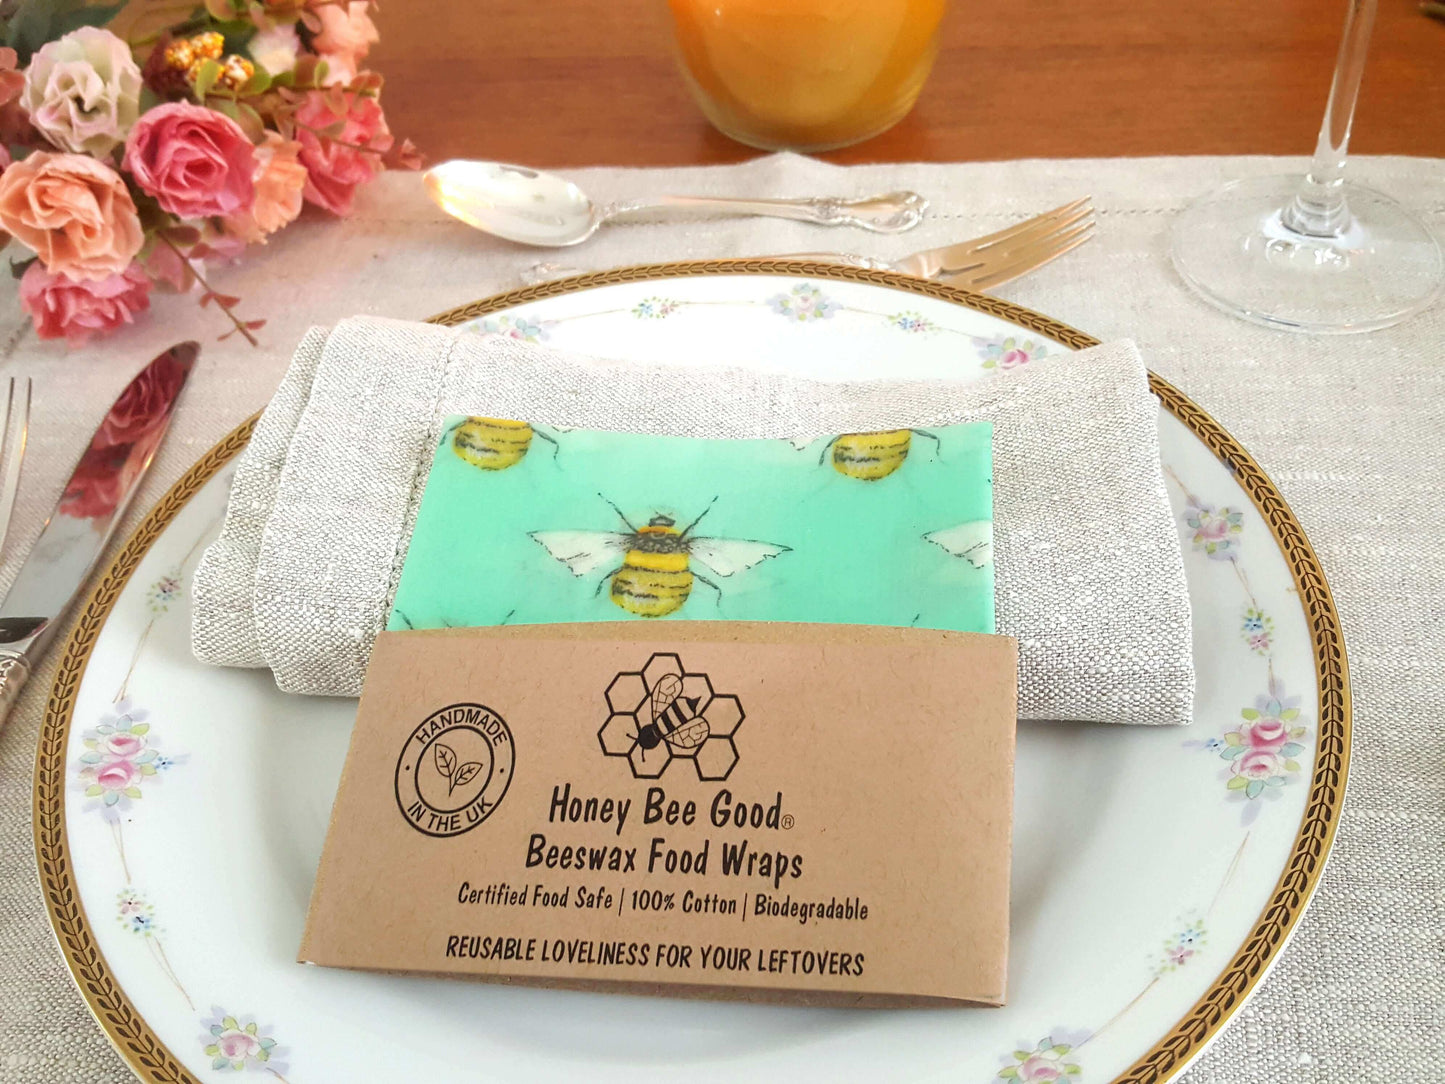 Reusable Beeswax Food Wraps 100% Hand Made in the UK by Honey Bee Good shown in Single Party Favour